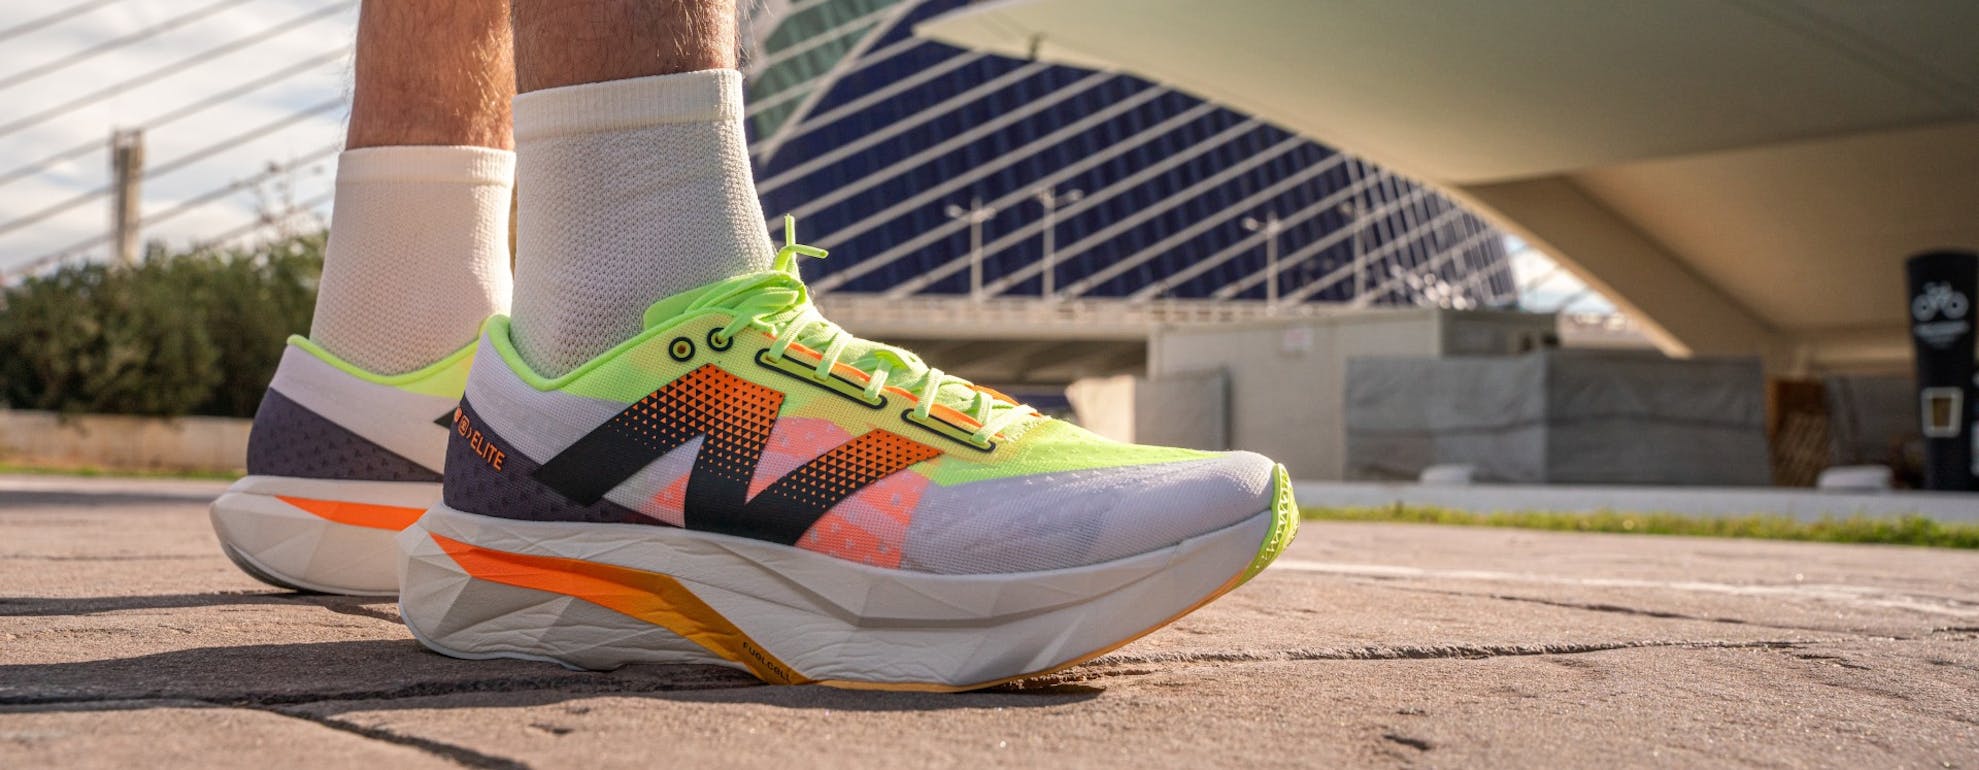 FIRST LOOK: New Balance Fuelcell SC Elite v4